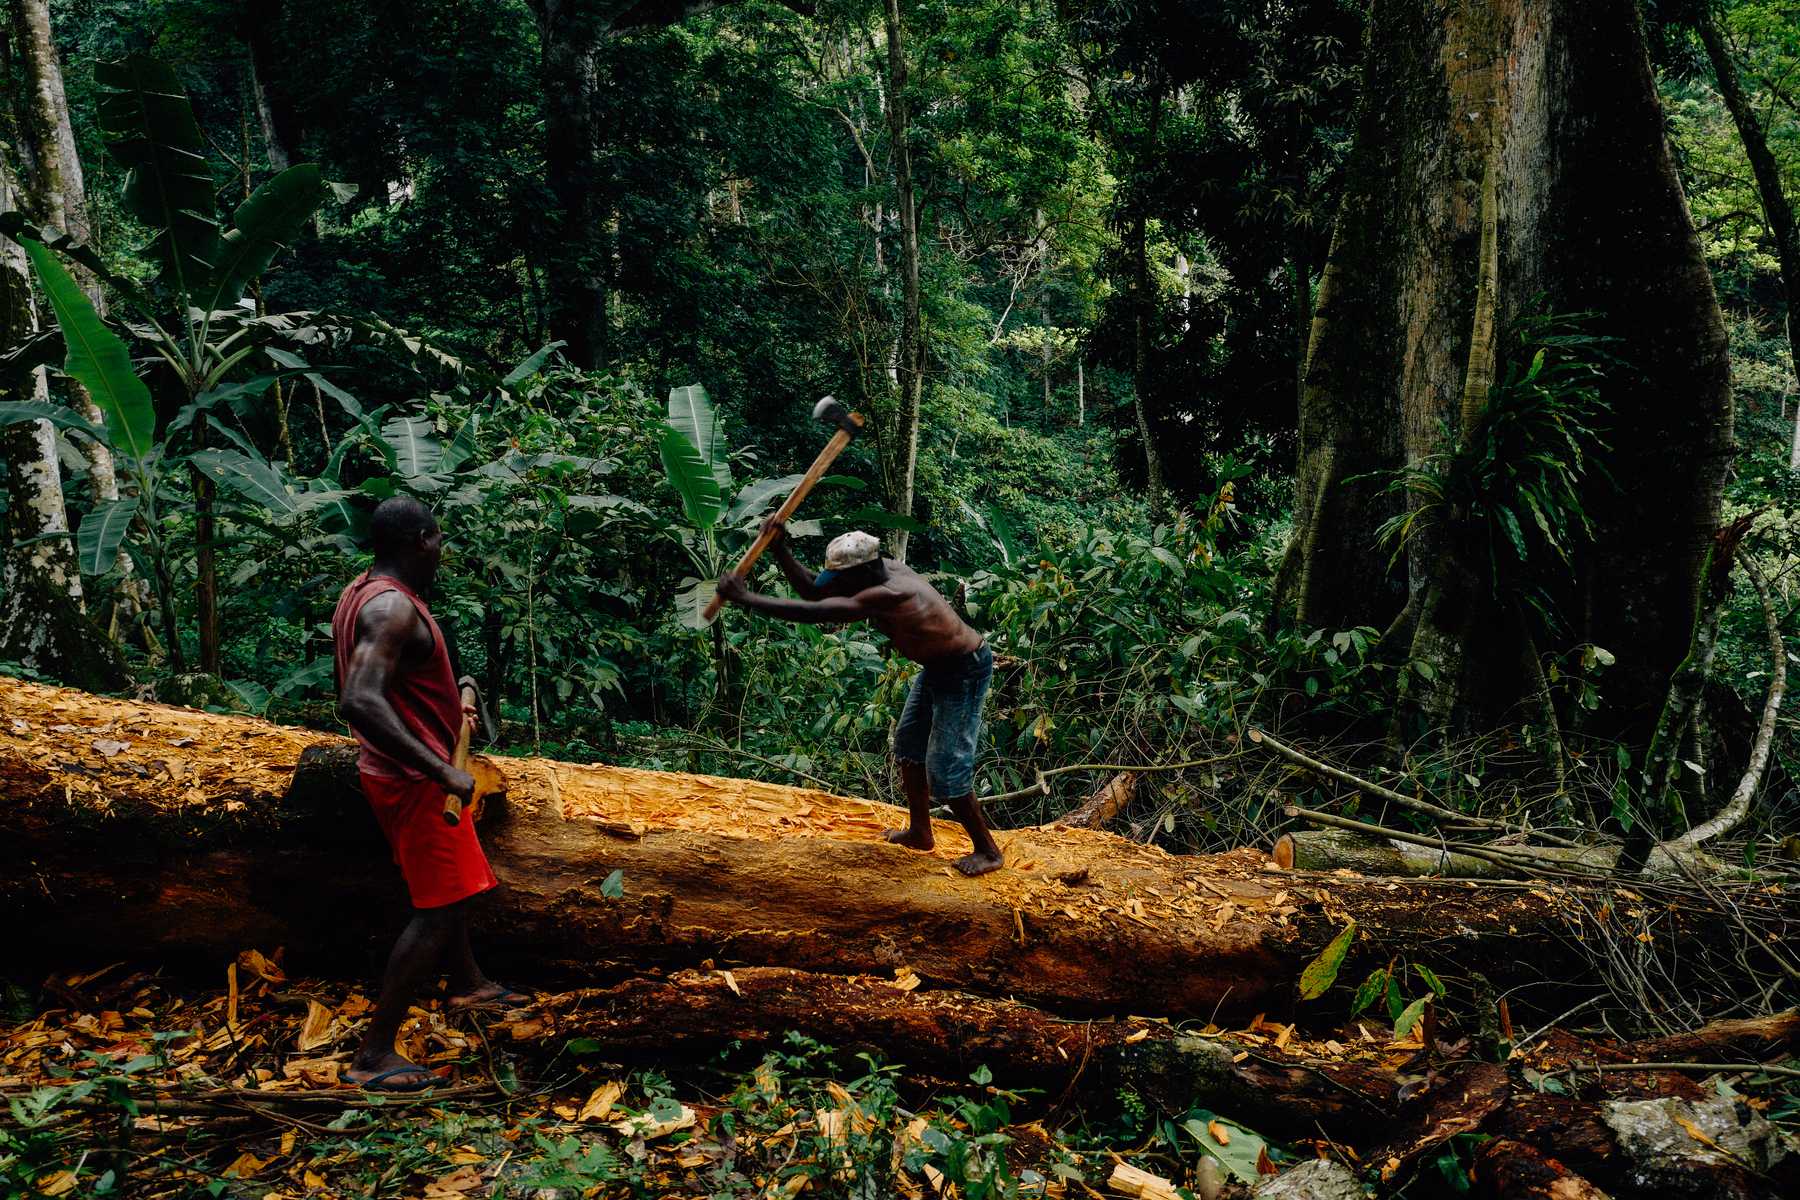 Two men working with axes on a log in a tropical forest.